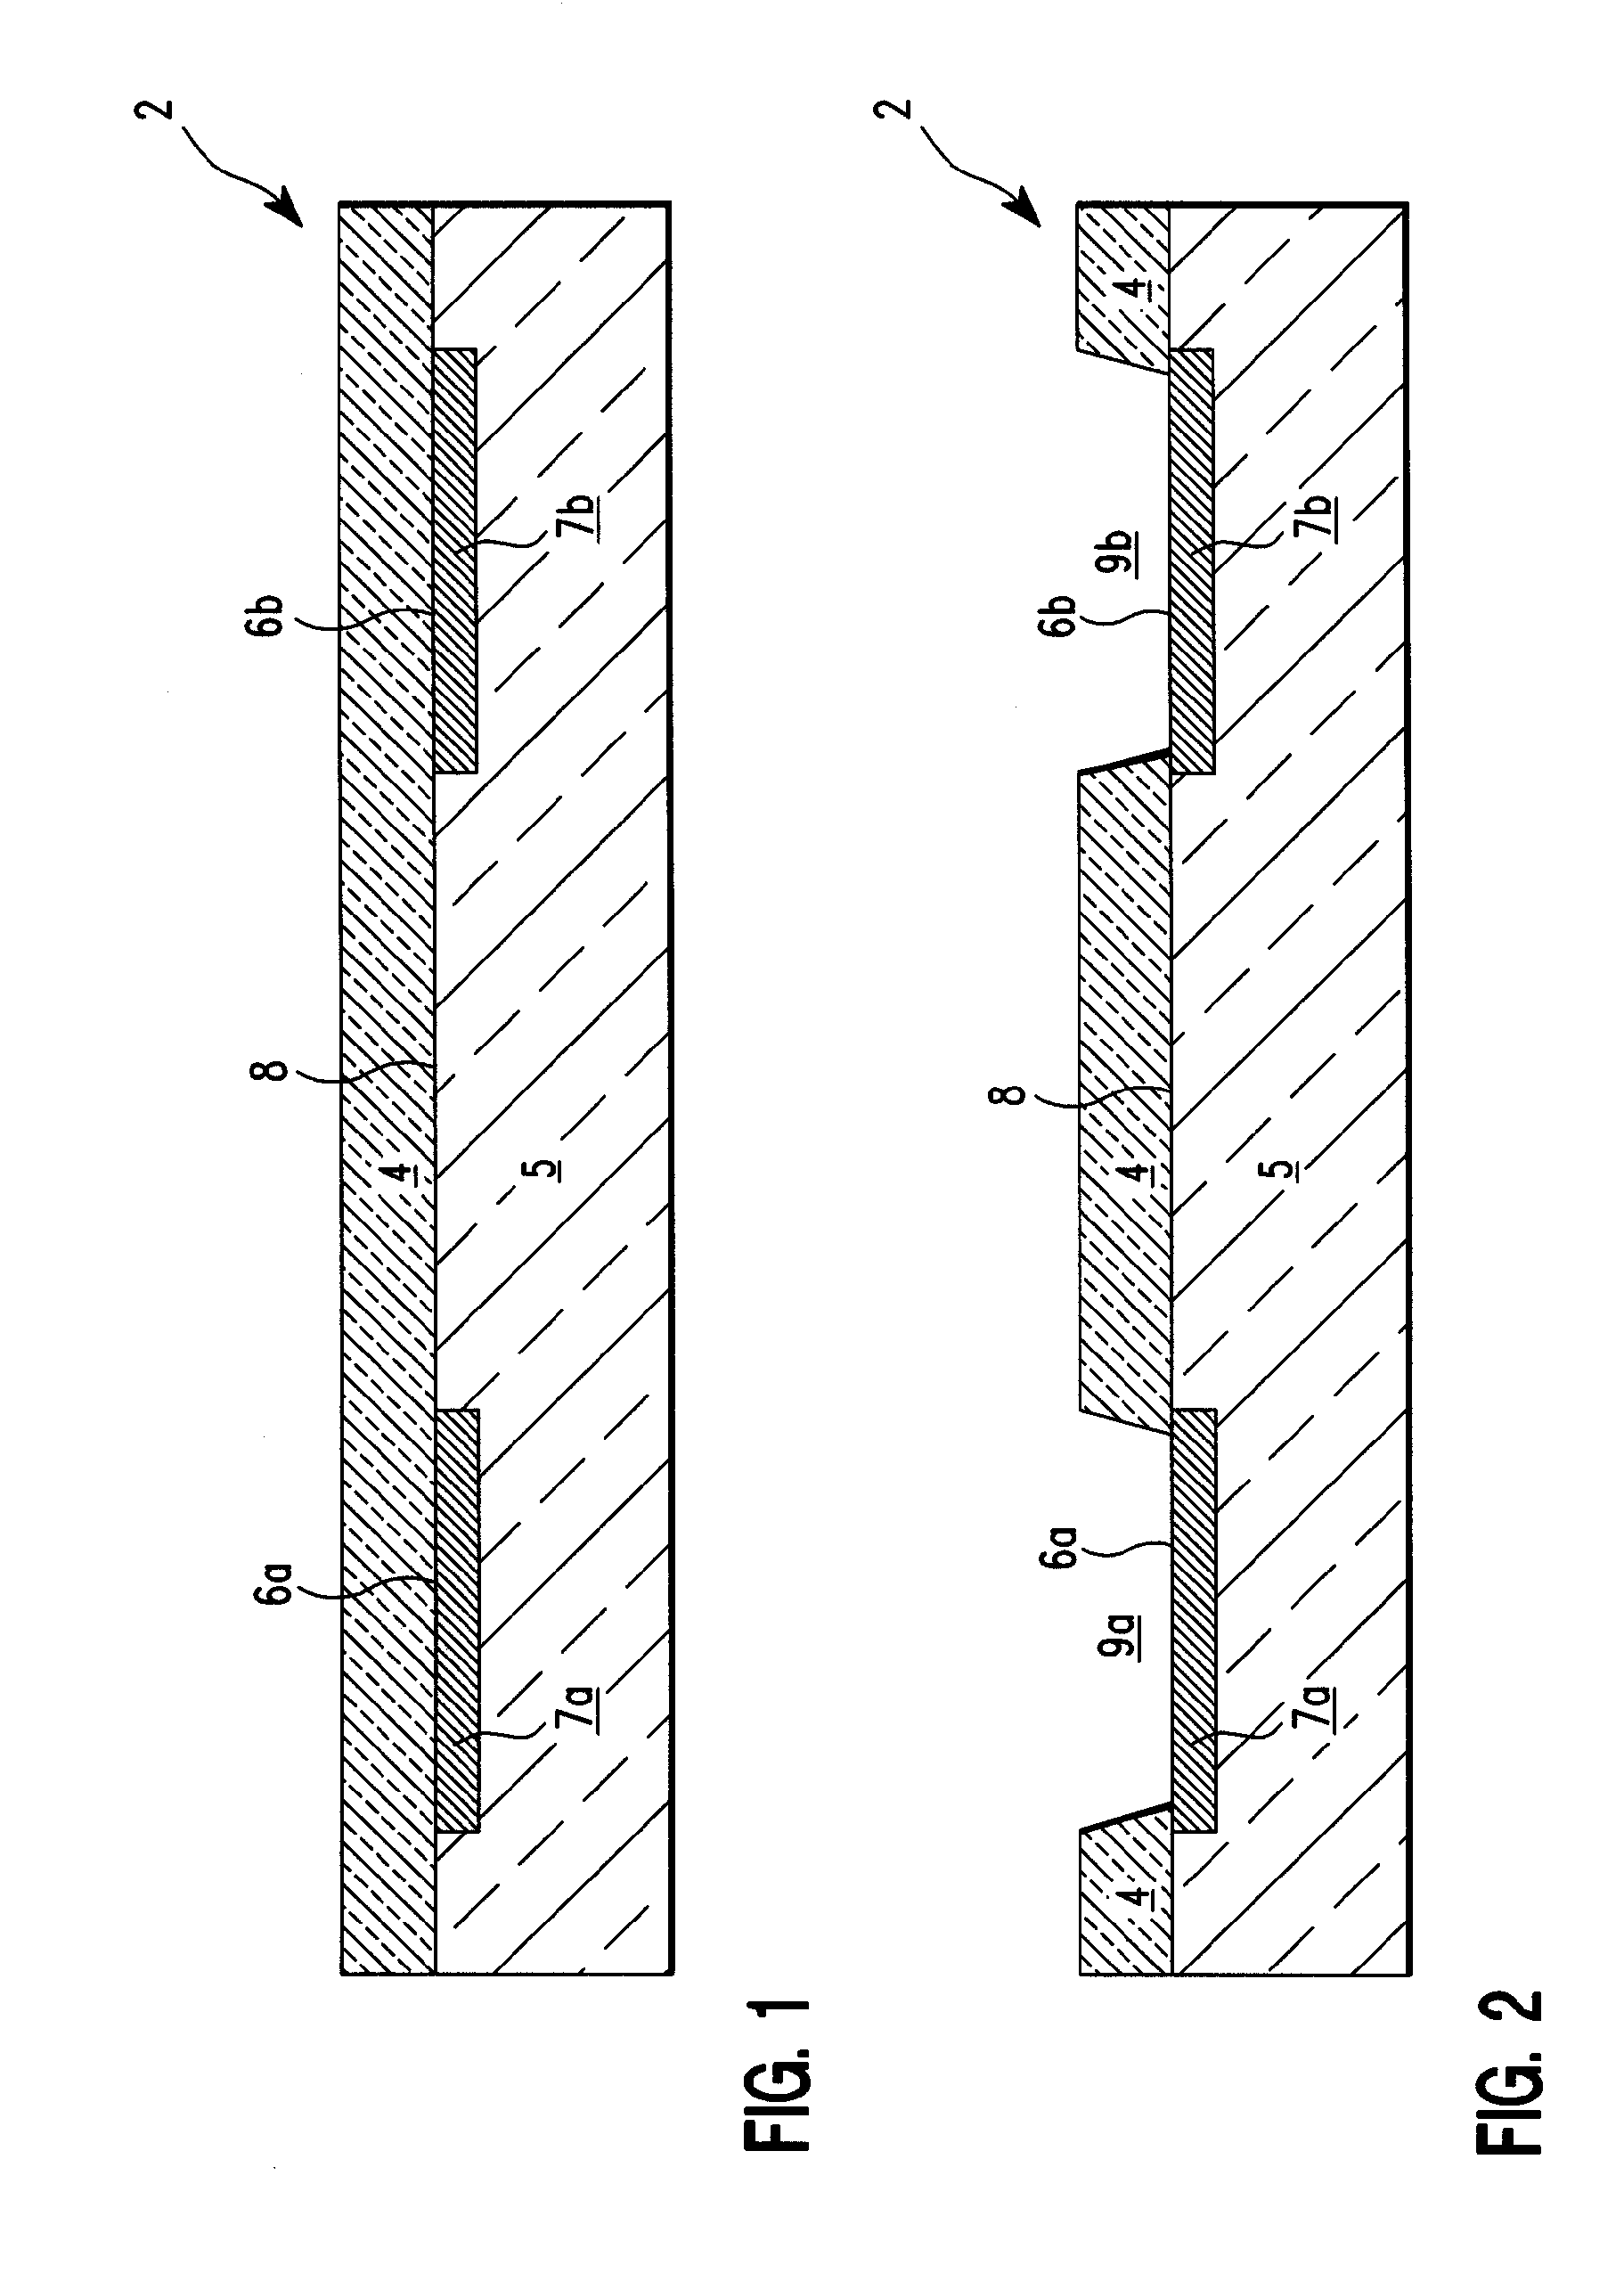 Electrical interconnection structure formation